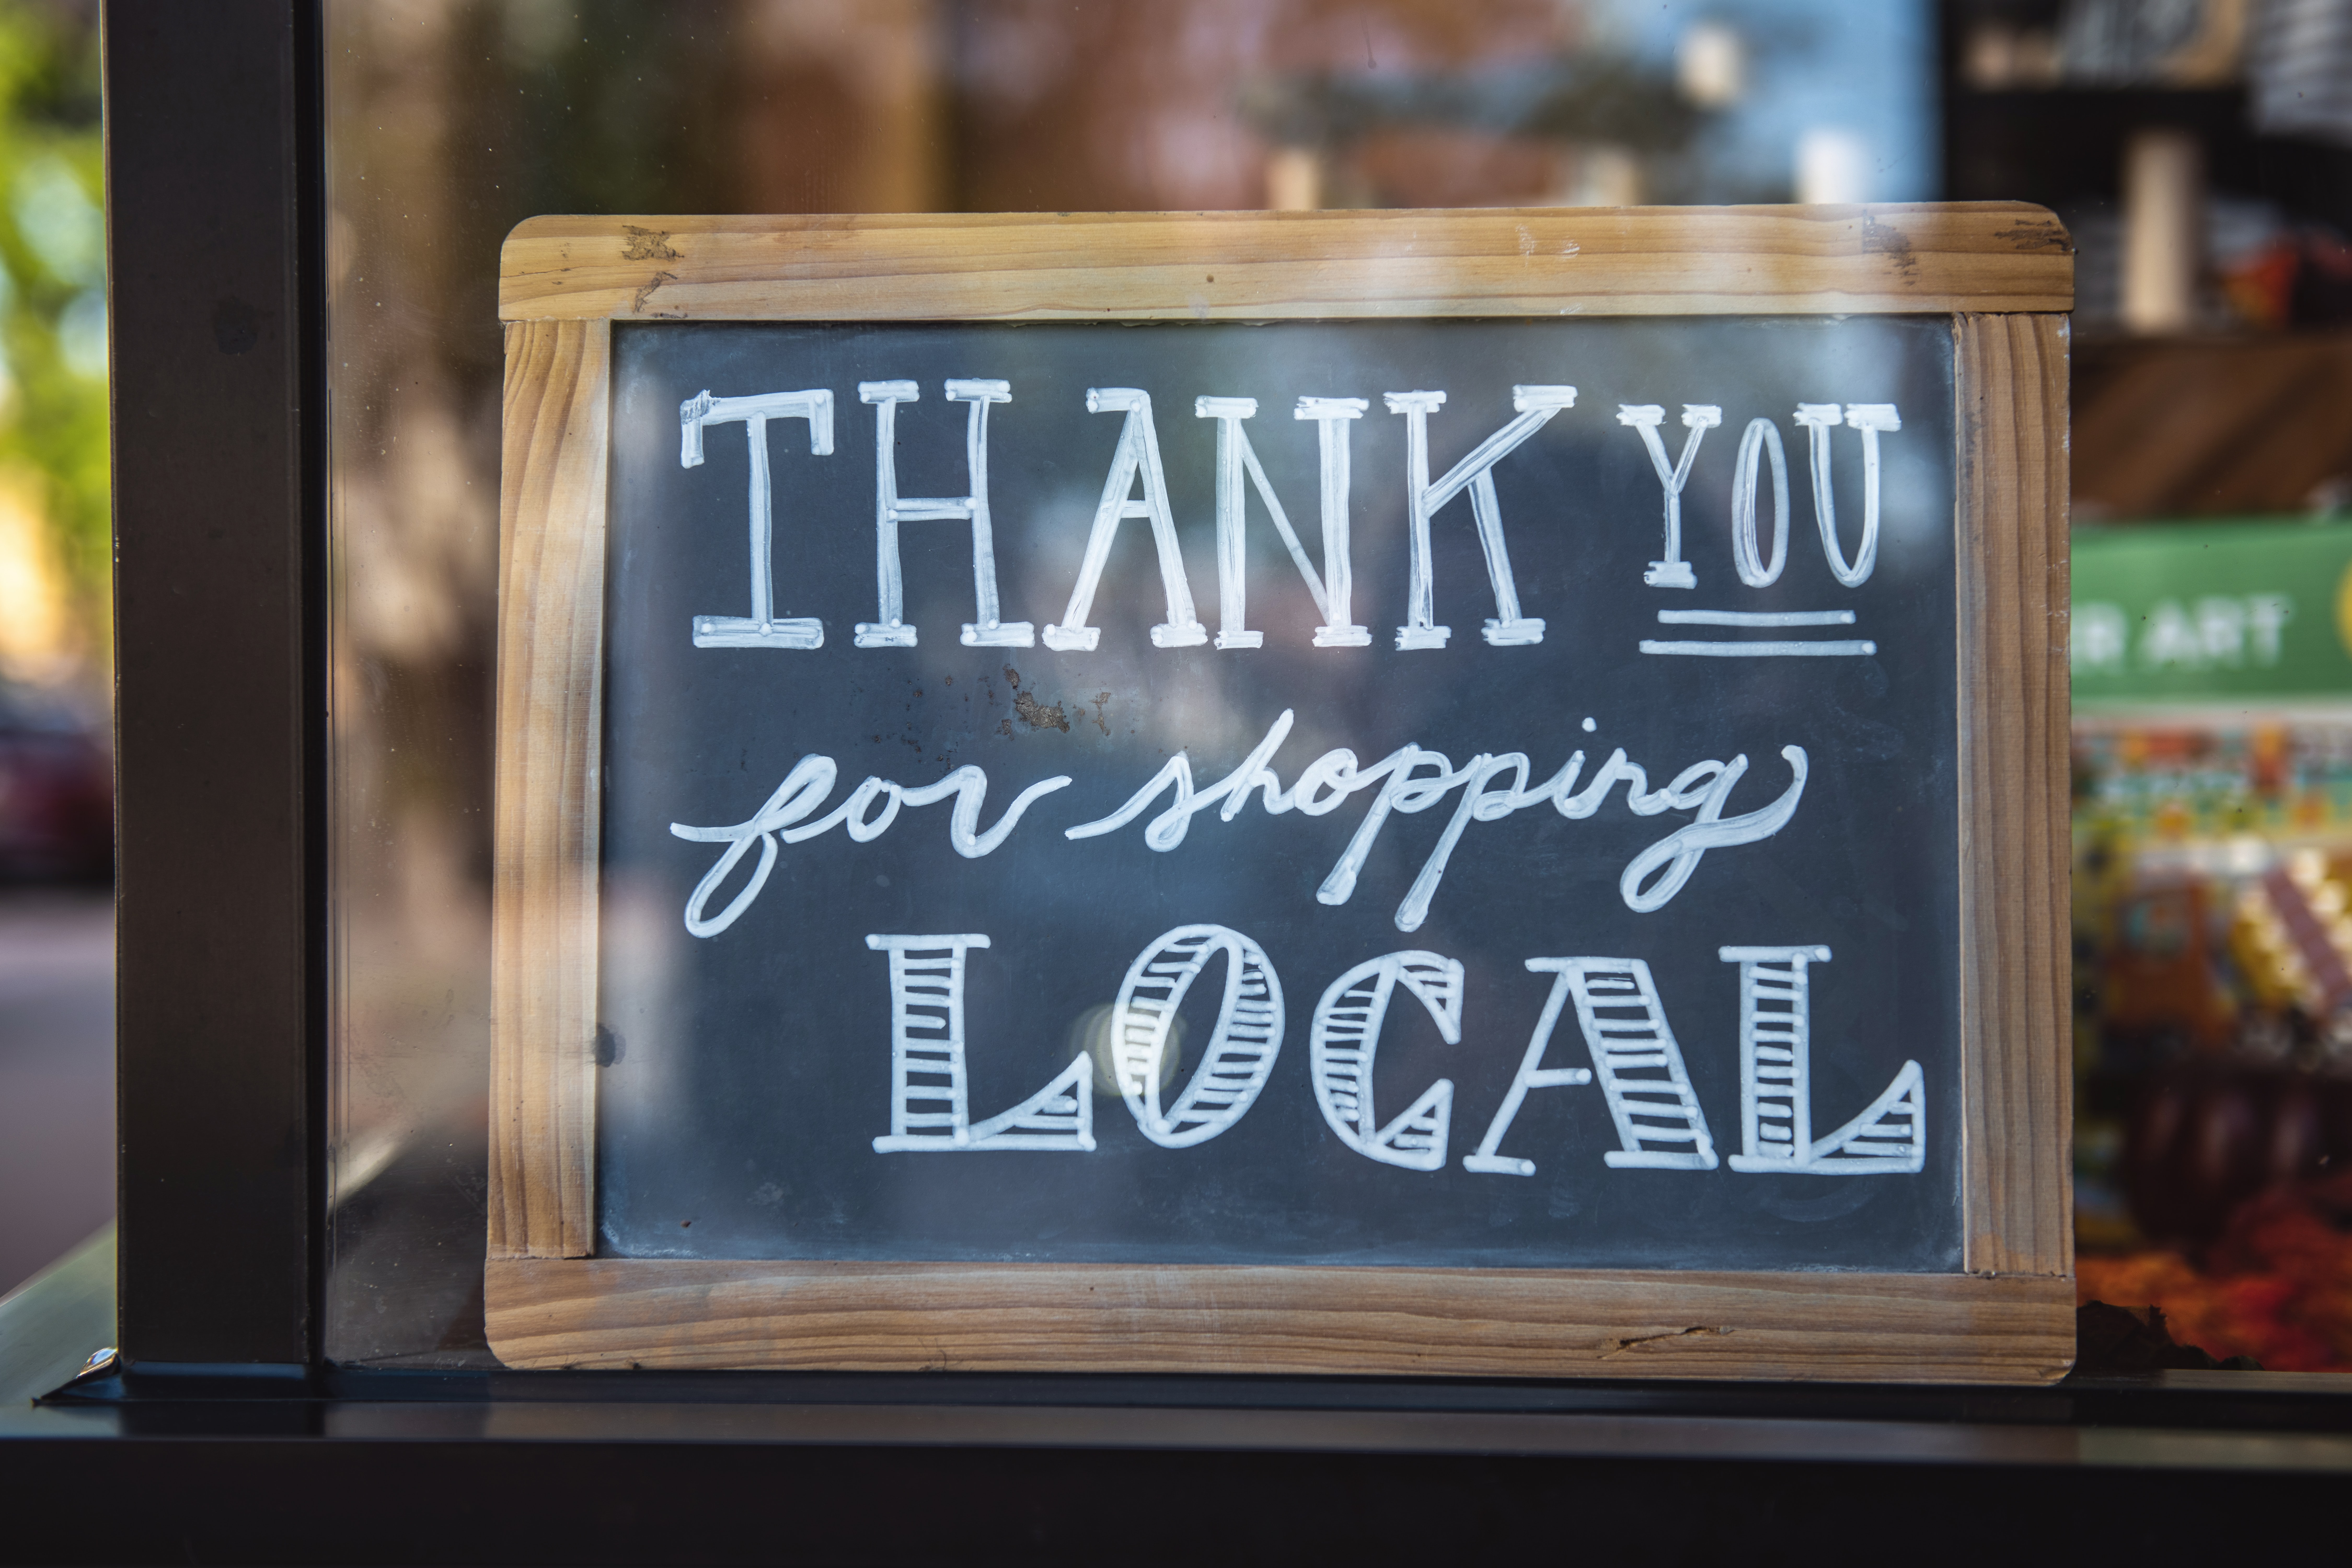 thank you for shopping local image